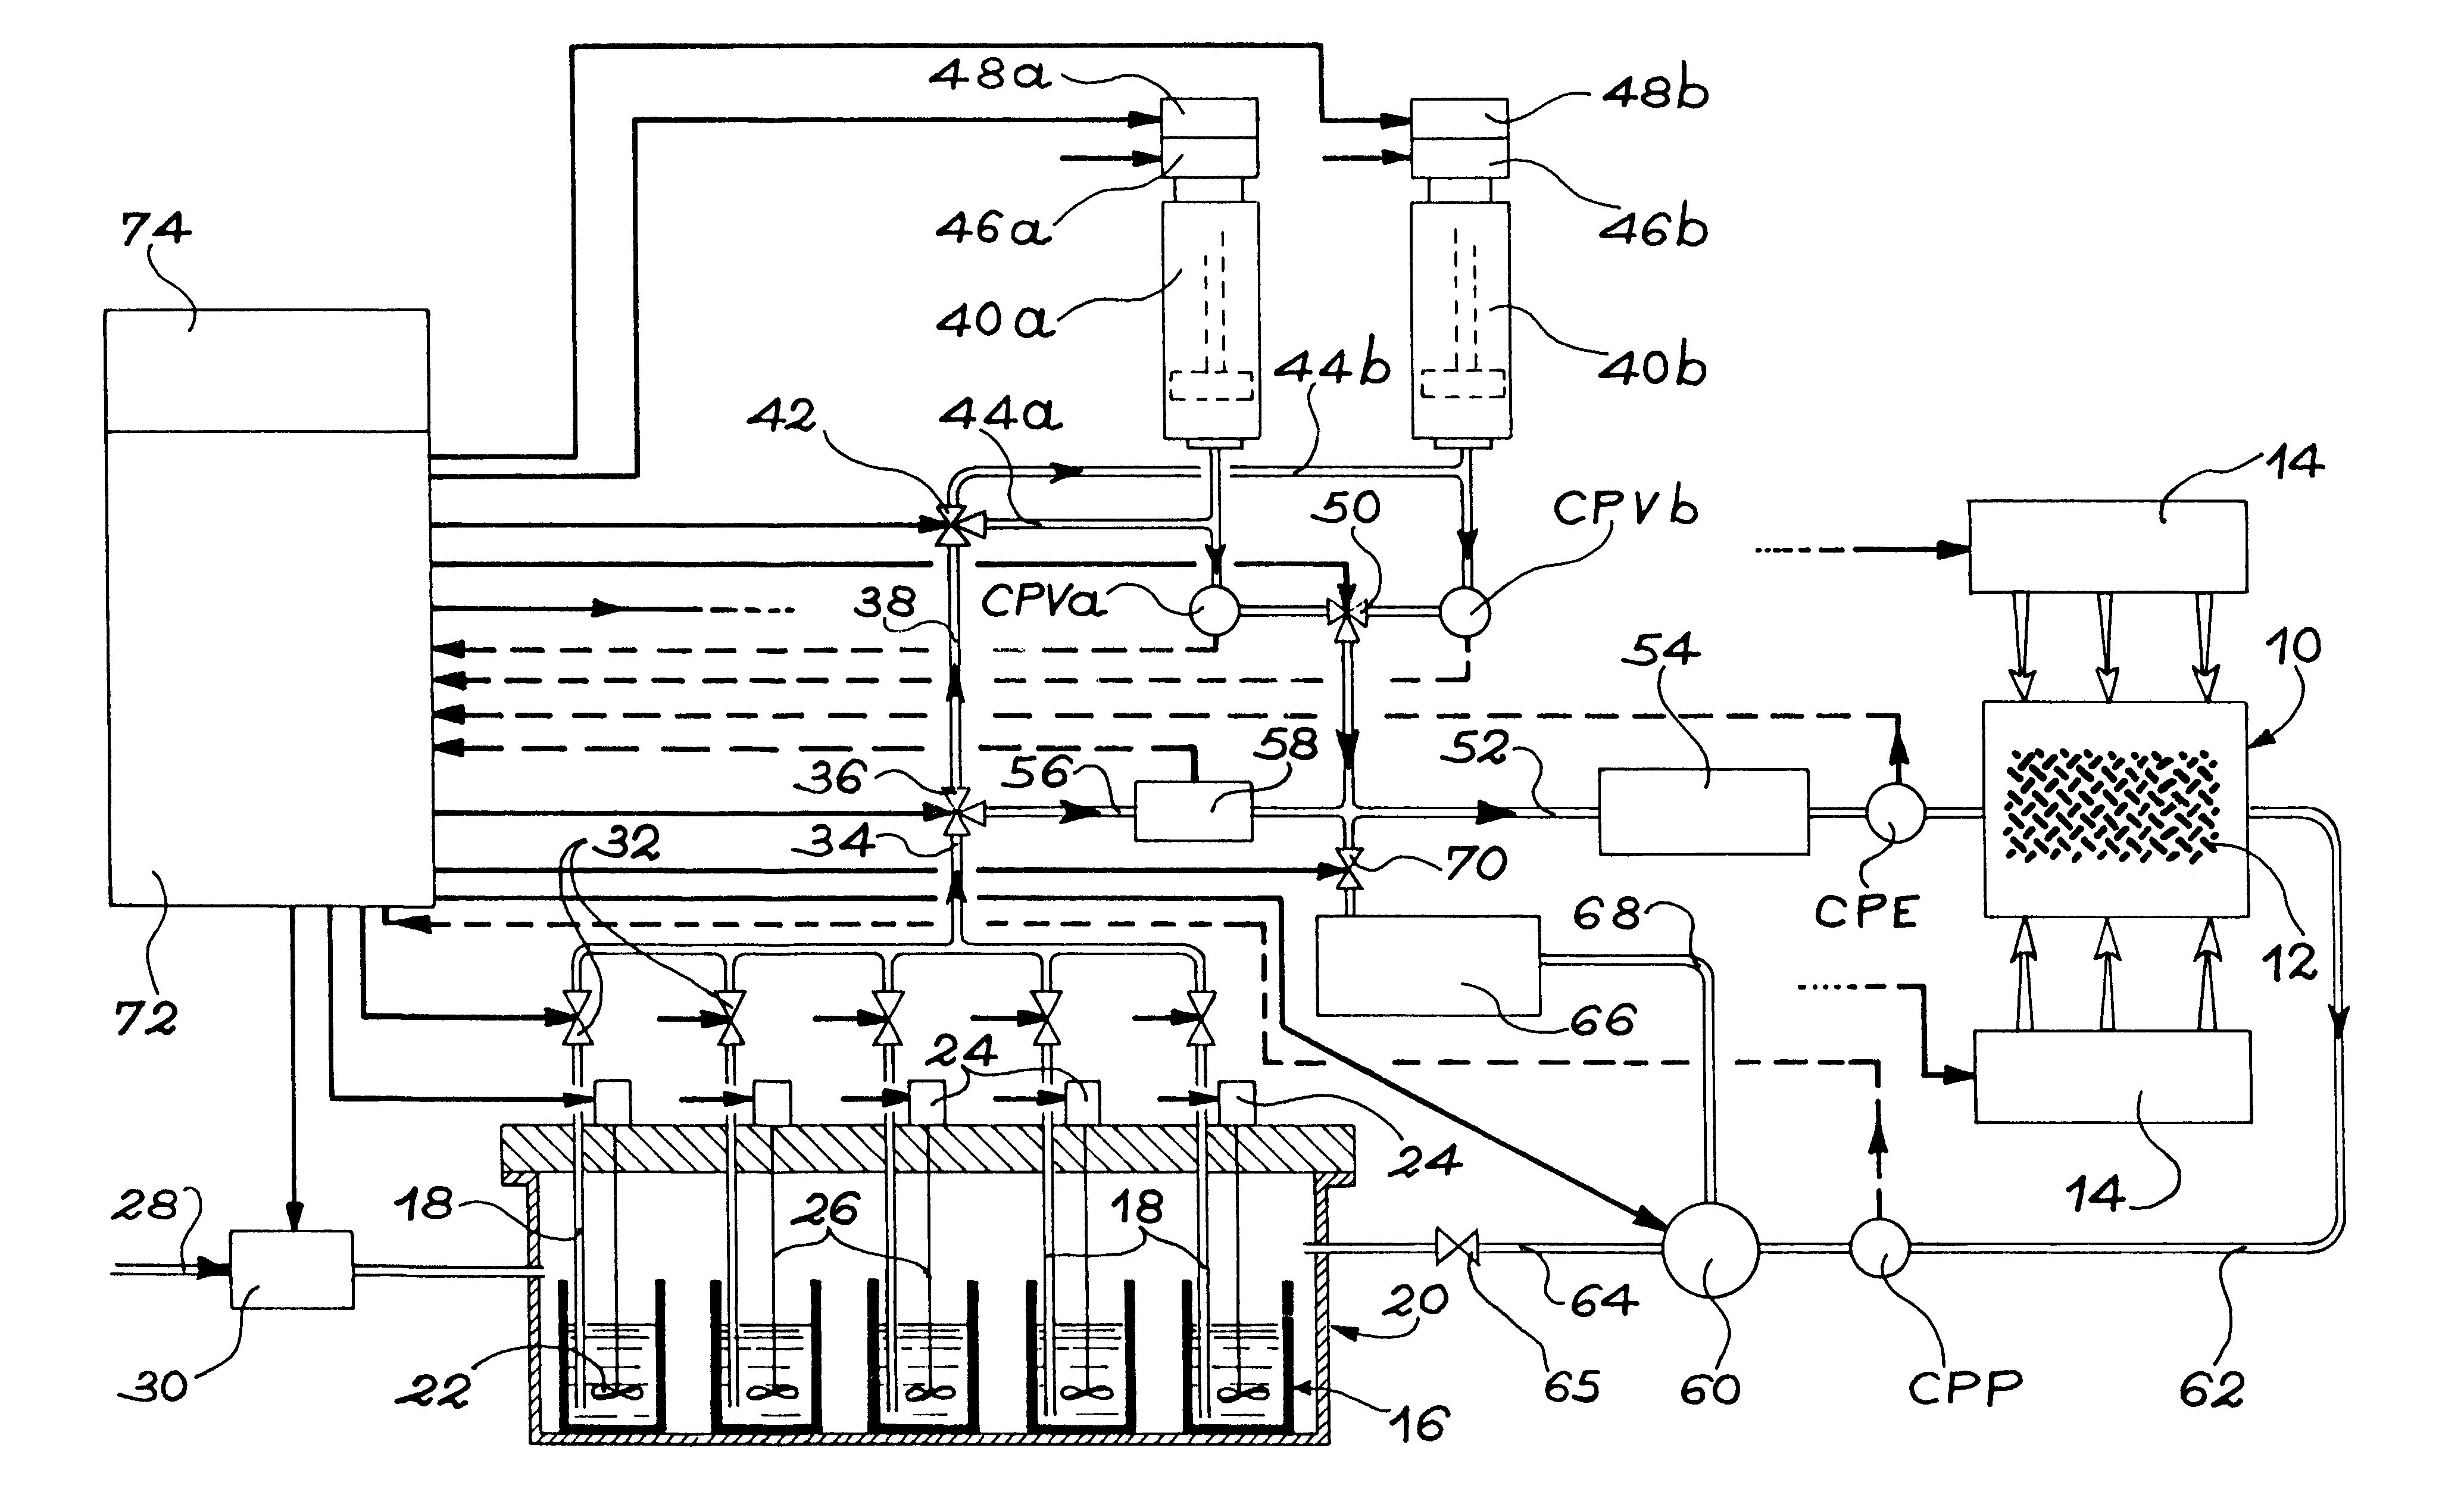 Apparatus for manufacturing composite parts produced by resin transfer molding